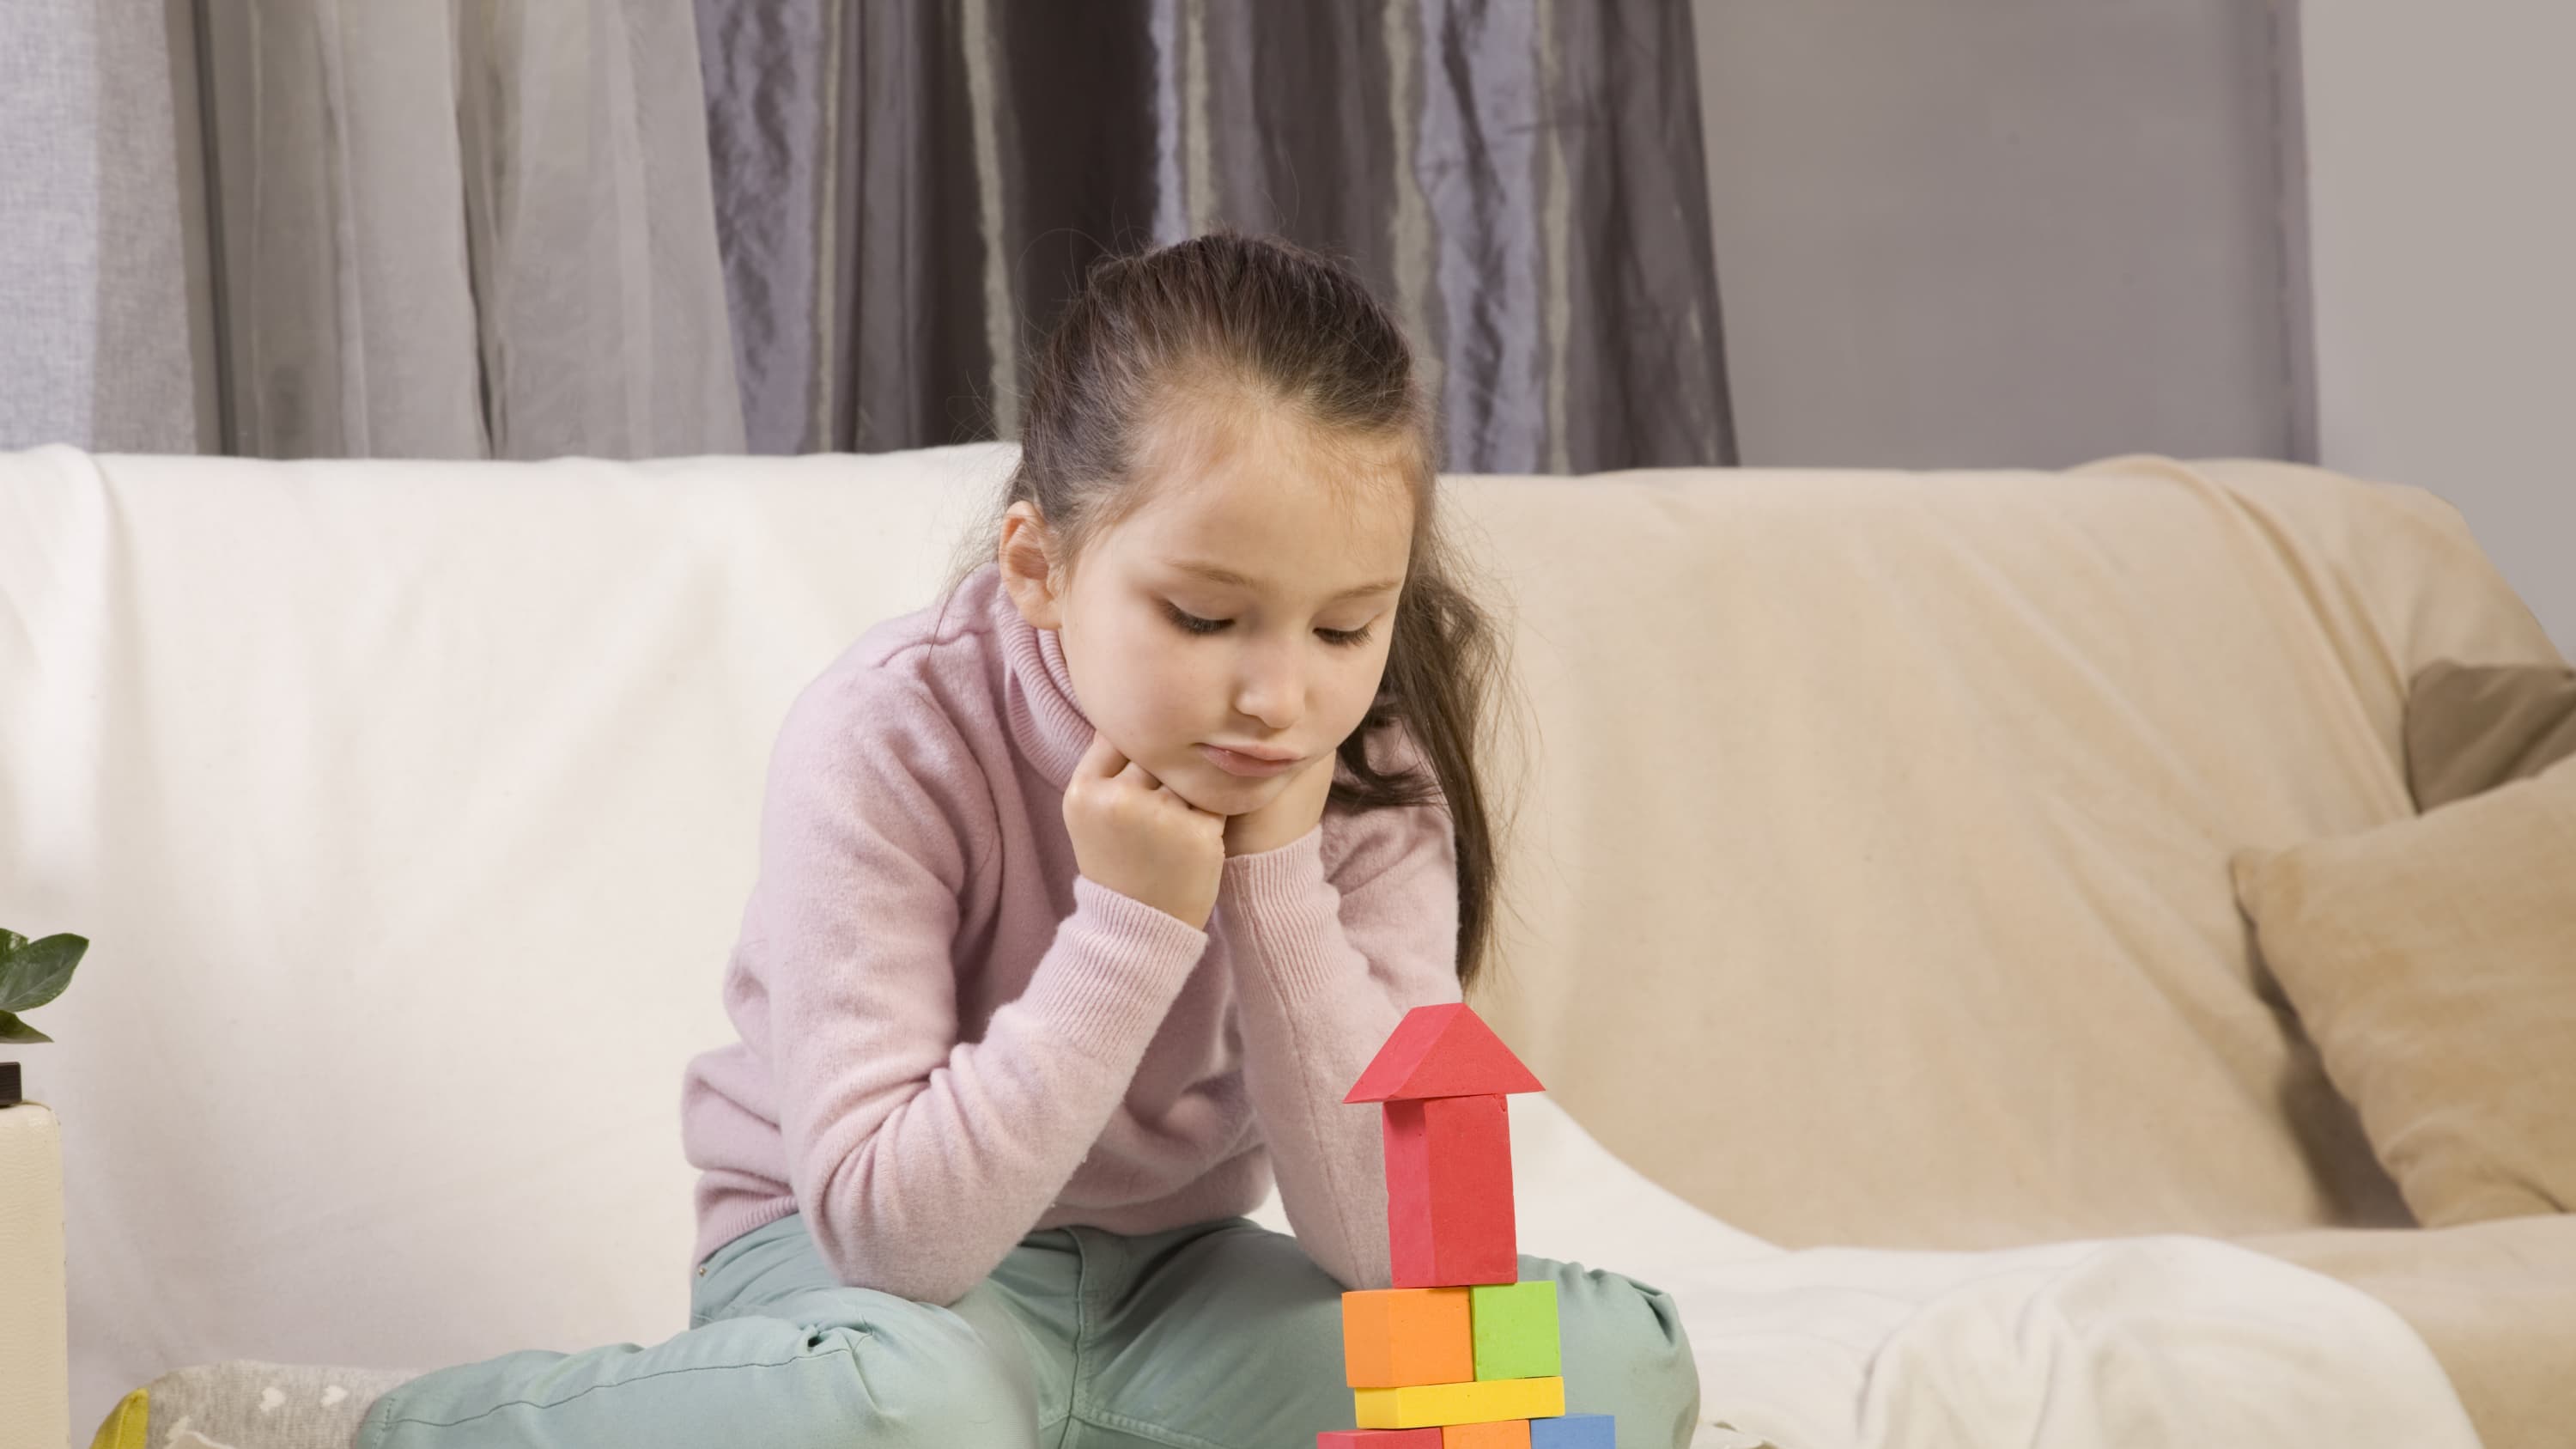 A child playing with blocks may have obsessive-compulsive disorder.